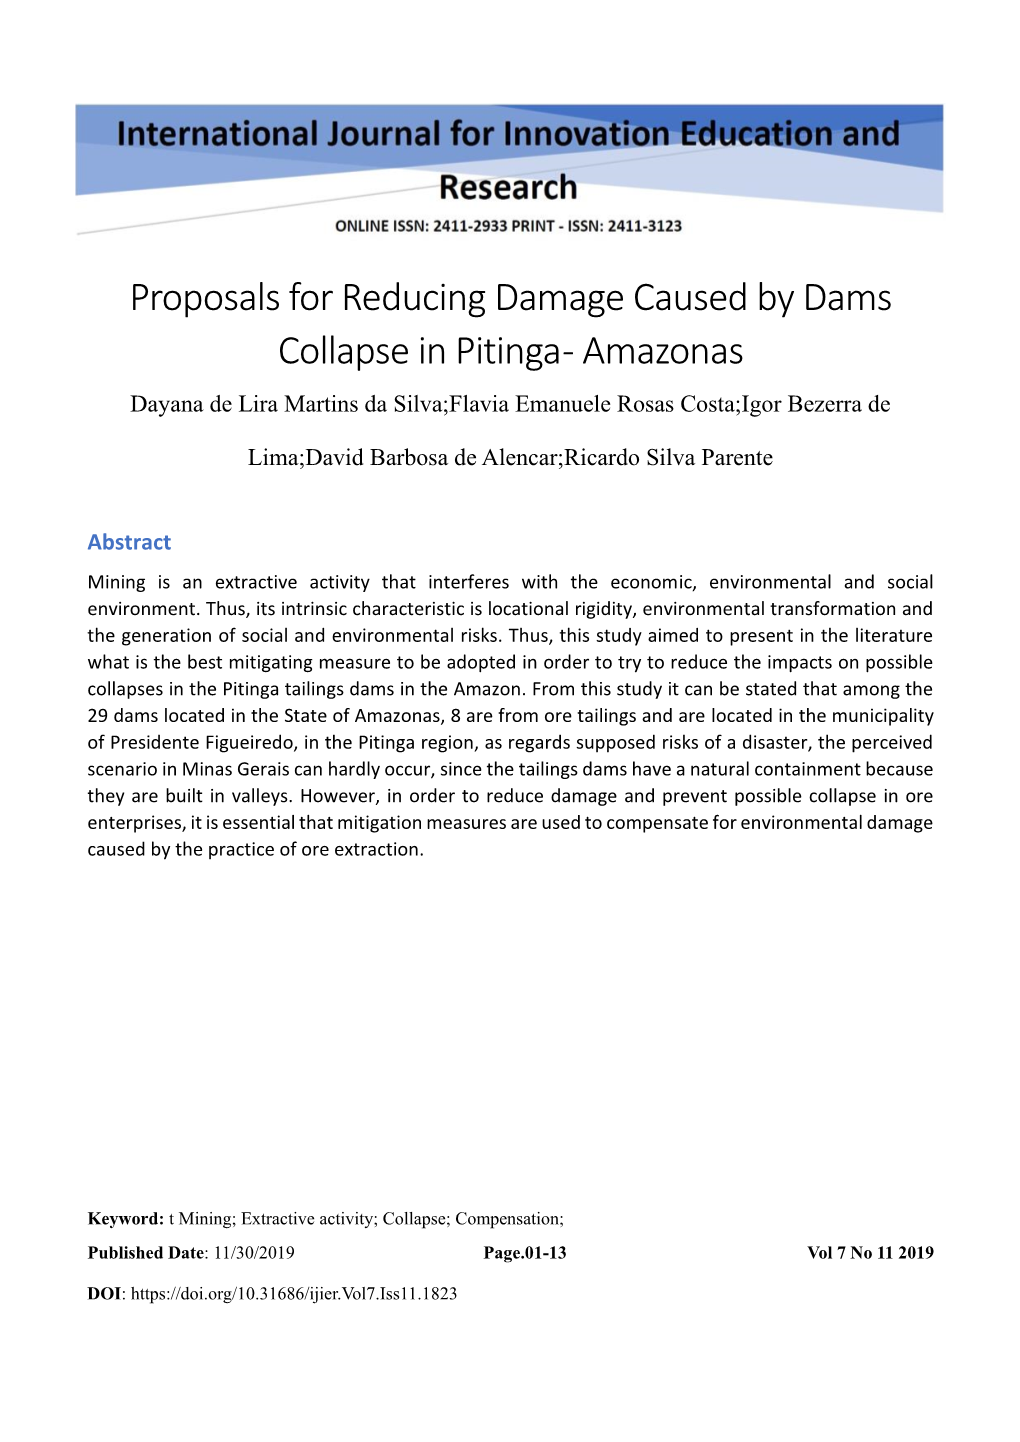 Proposals for Reducing Damage Caused by Dams Collapse in Pitinga